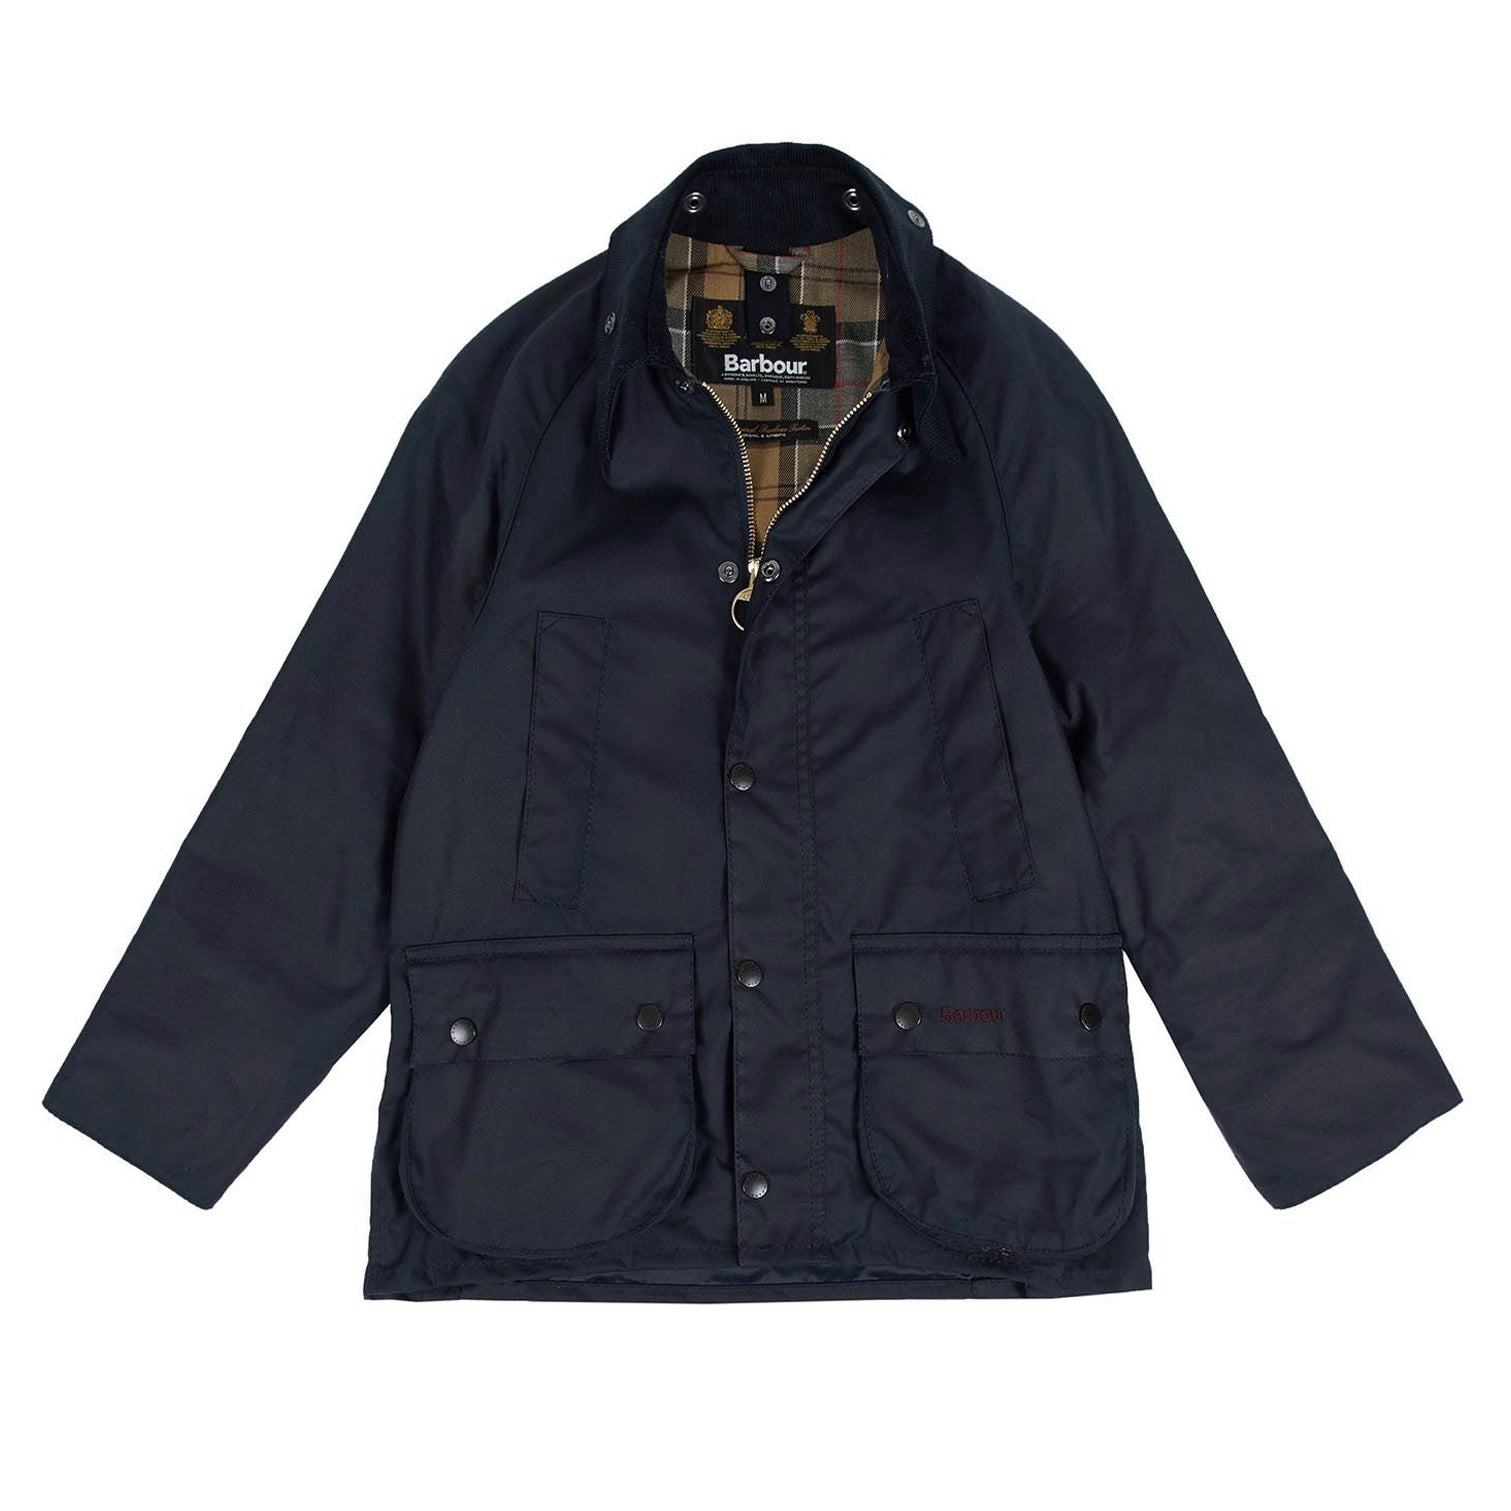 Barbour Child's Bedale Waxed Cotton Jacket